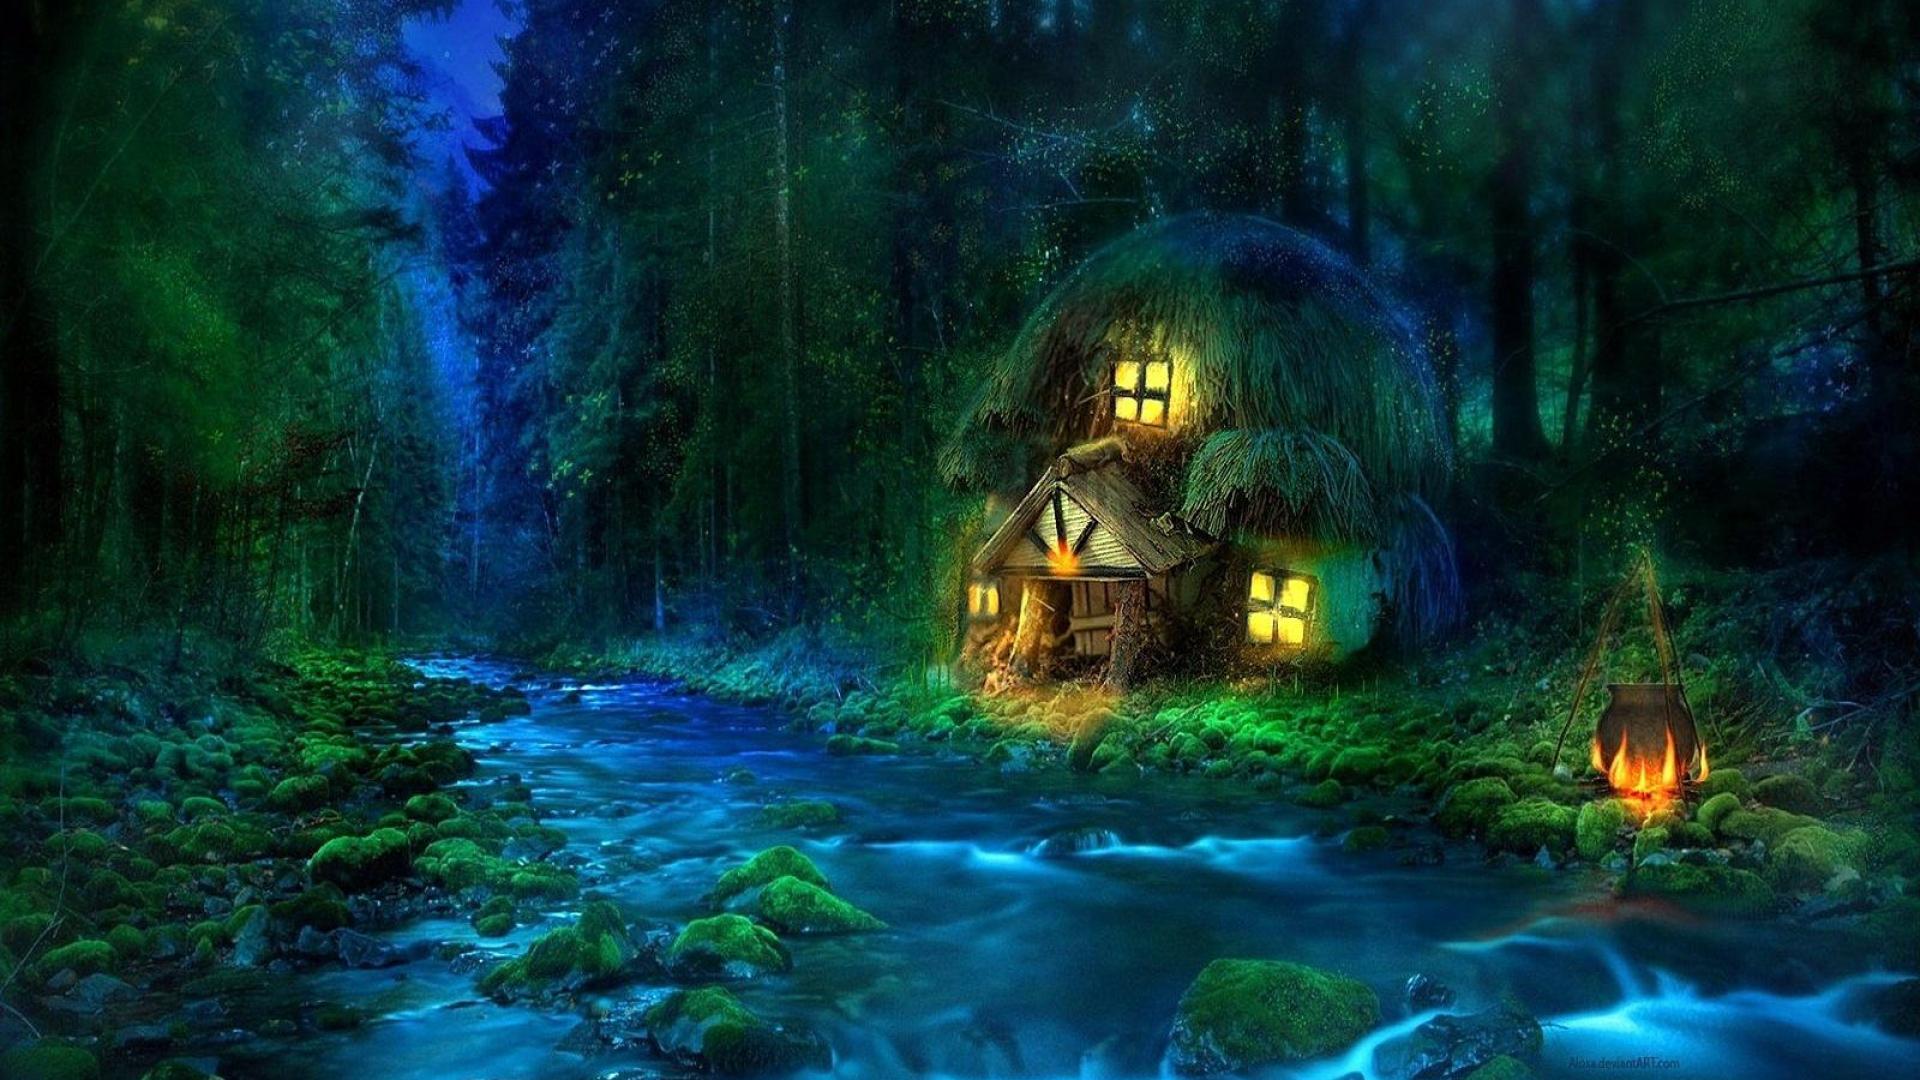 Fairytale - (#147649) - High Quality and Resolution Wallpapers on ...